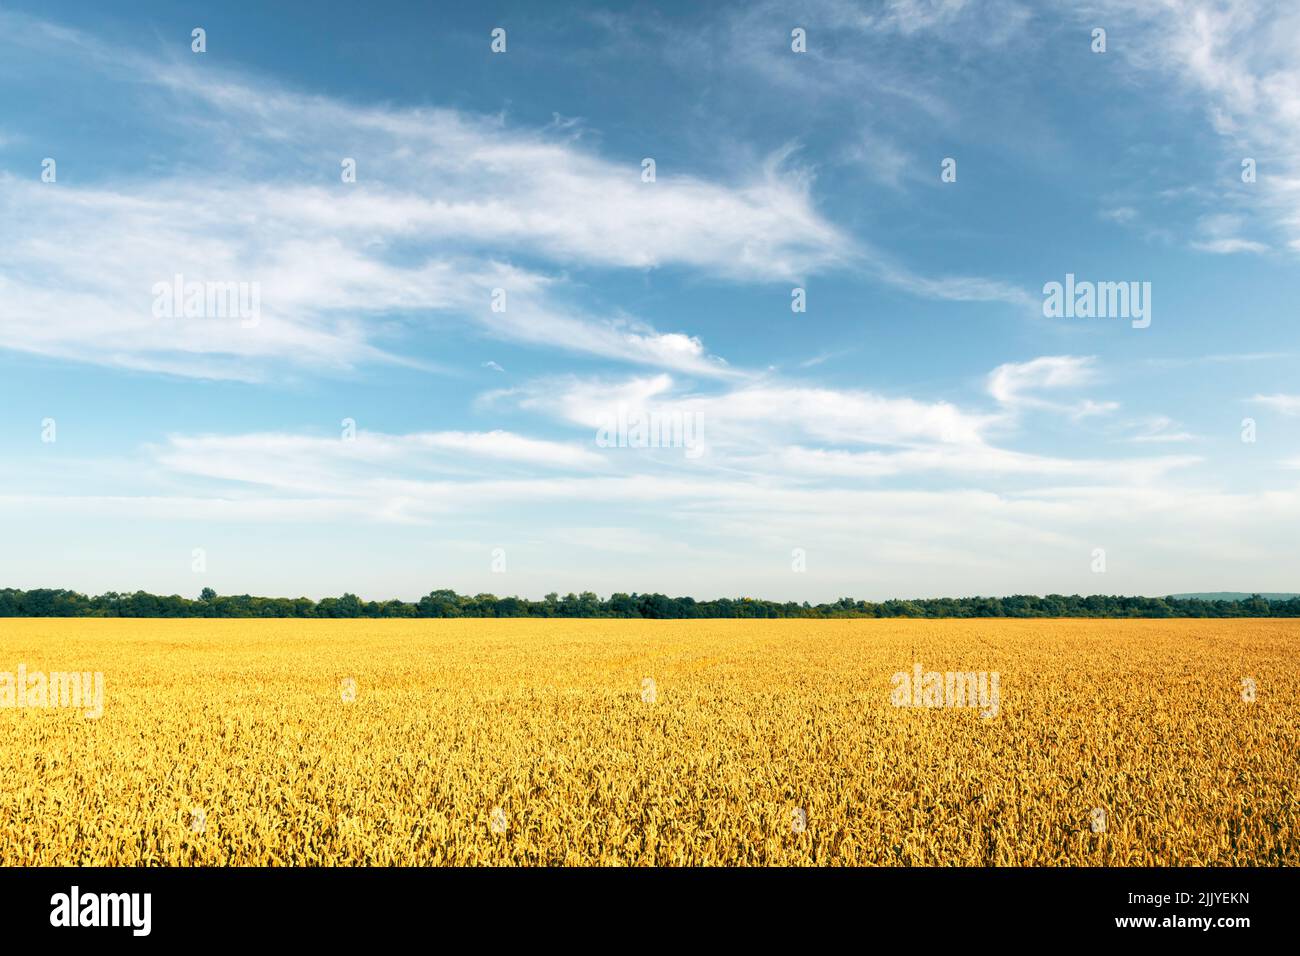 Ripe wheat spikelets on golden field infront blue sky with fluffy clouds. Industrial and nature landscape. Ukraine, Europe Stock Photo